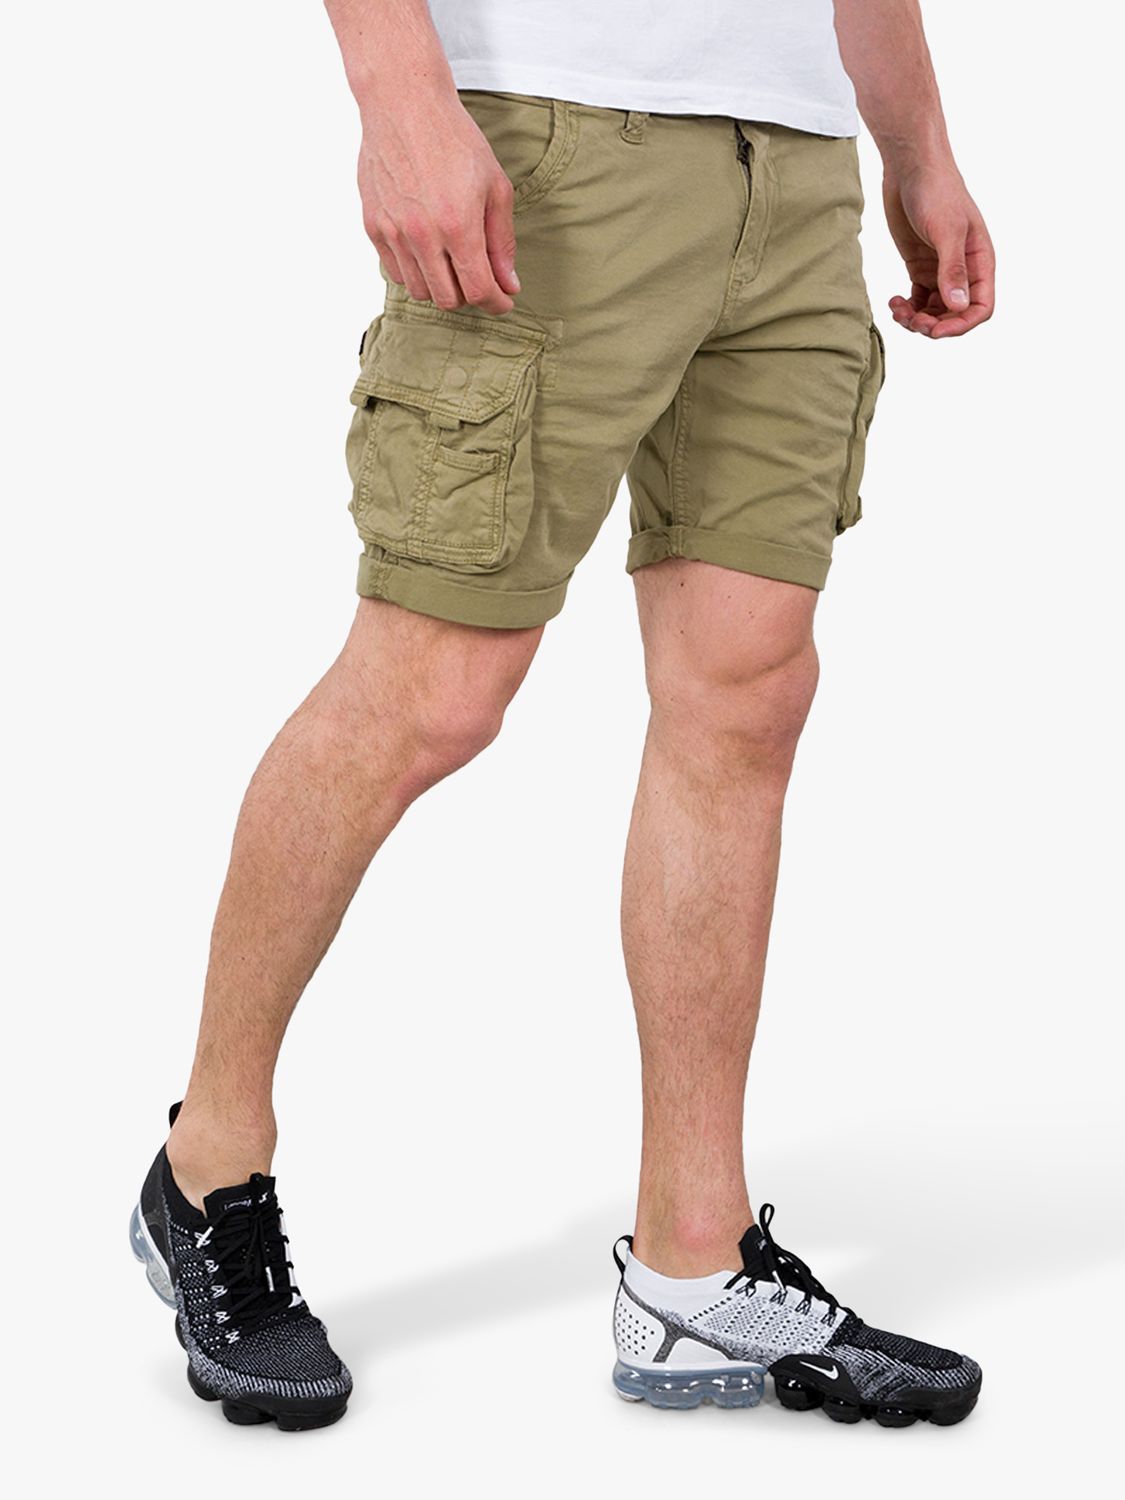 Partners Light Industries Cargo 82 at Shorts, & Alpha John Lewis Crew Olive